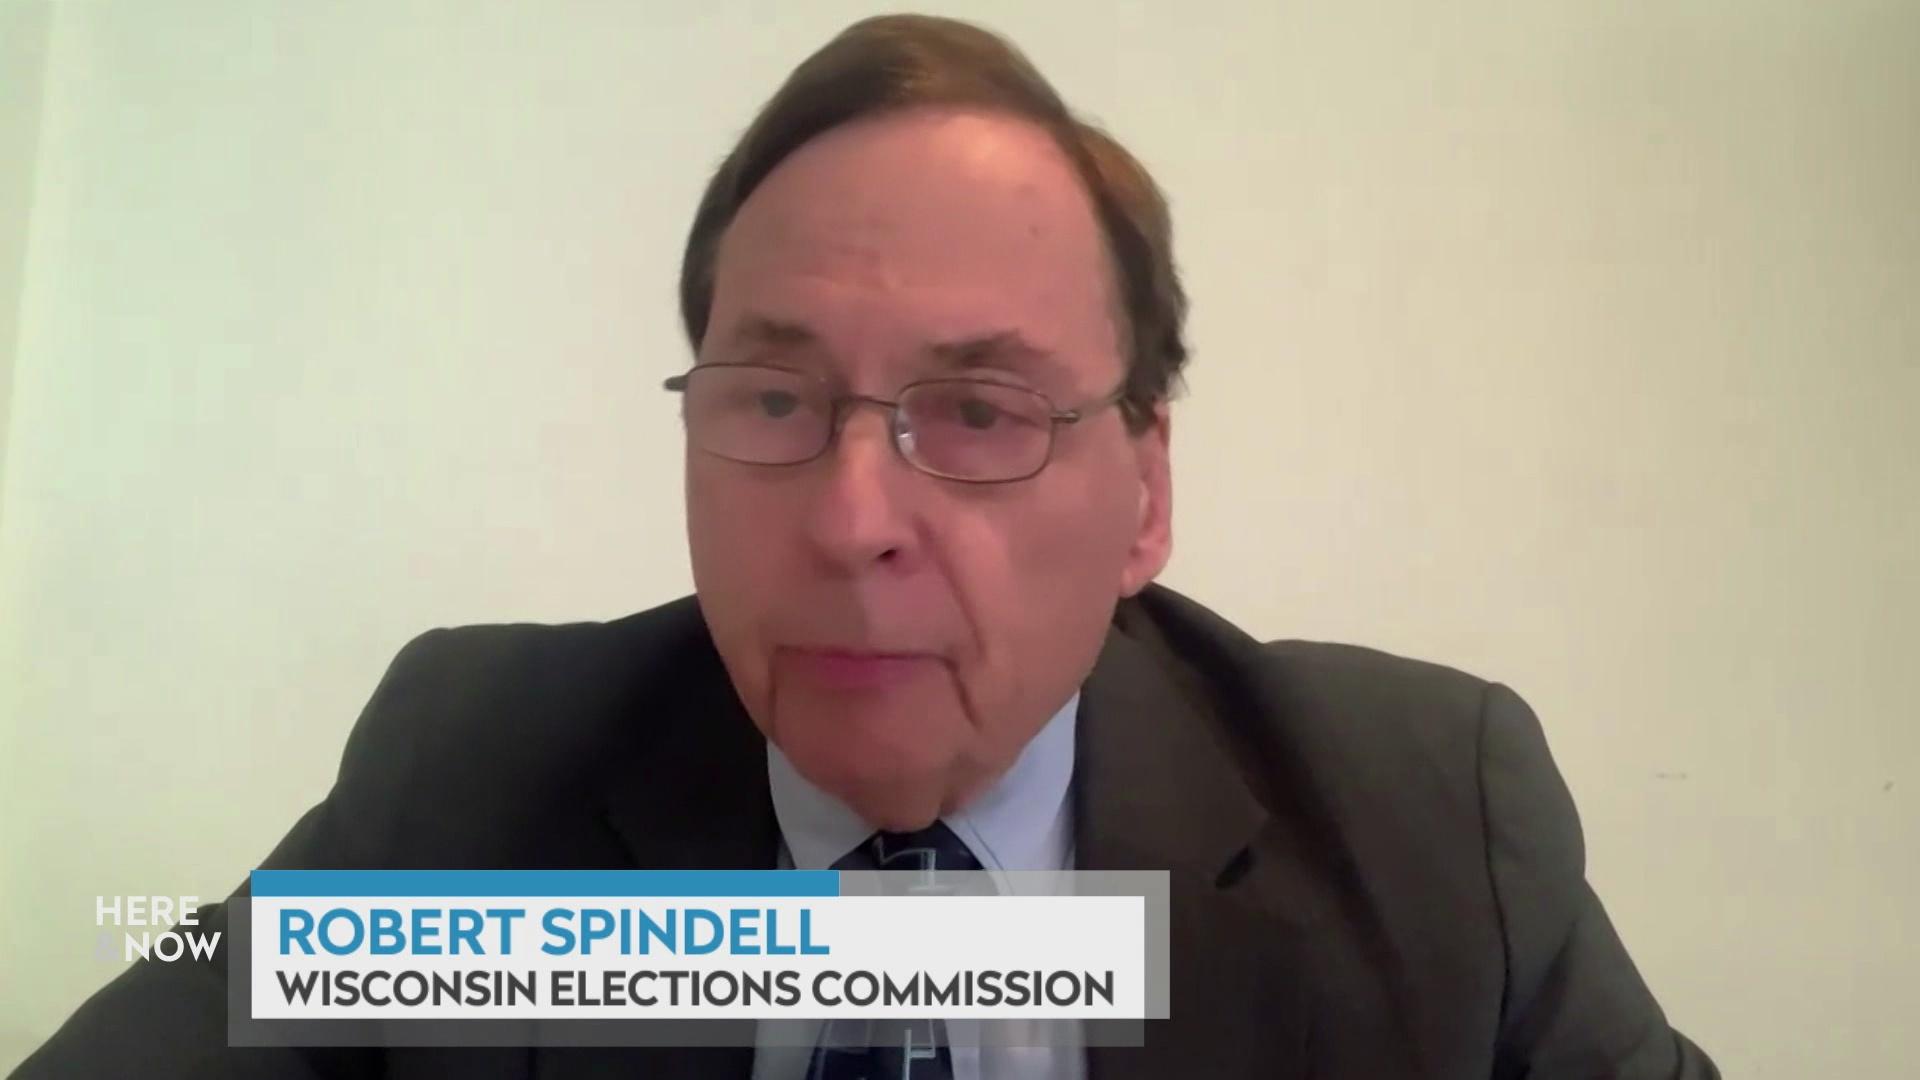 Robert Spindell on voter turnout, suppression in Wisconsin